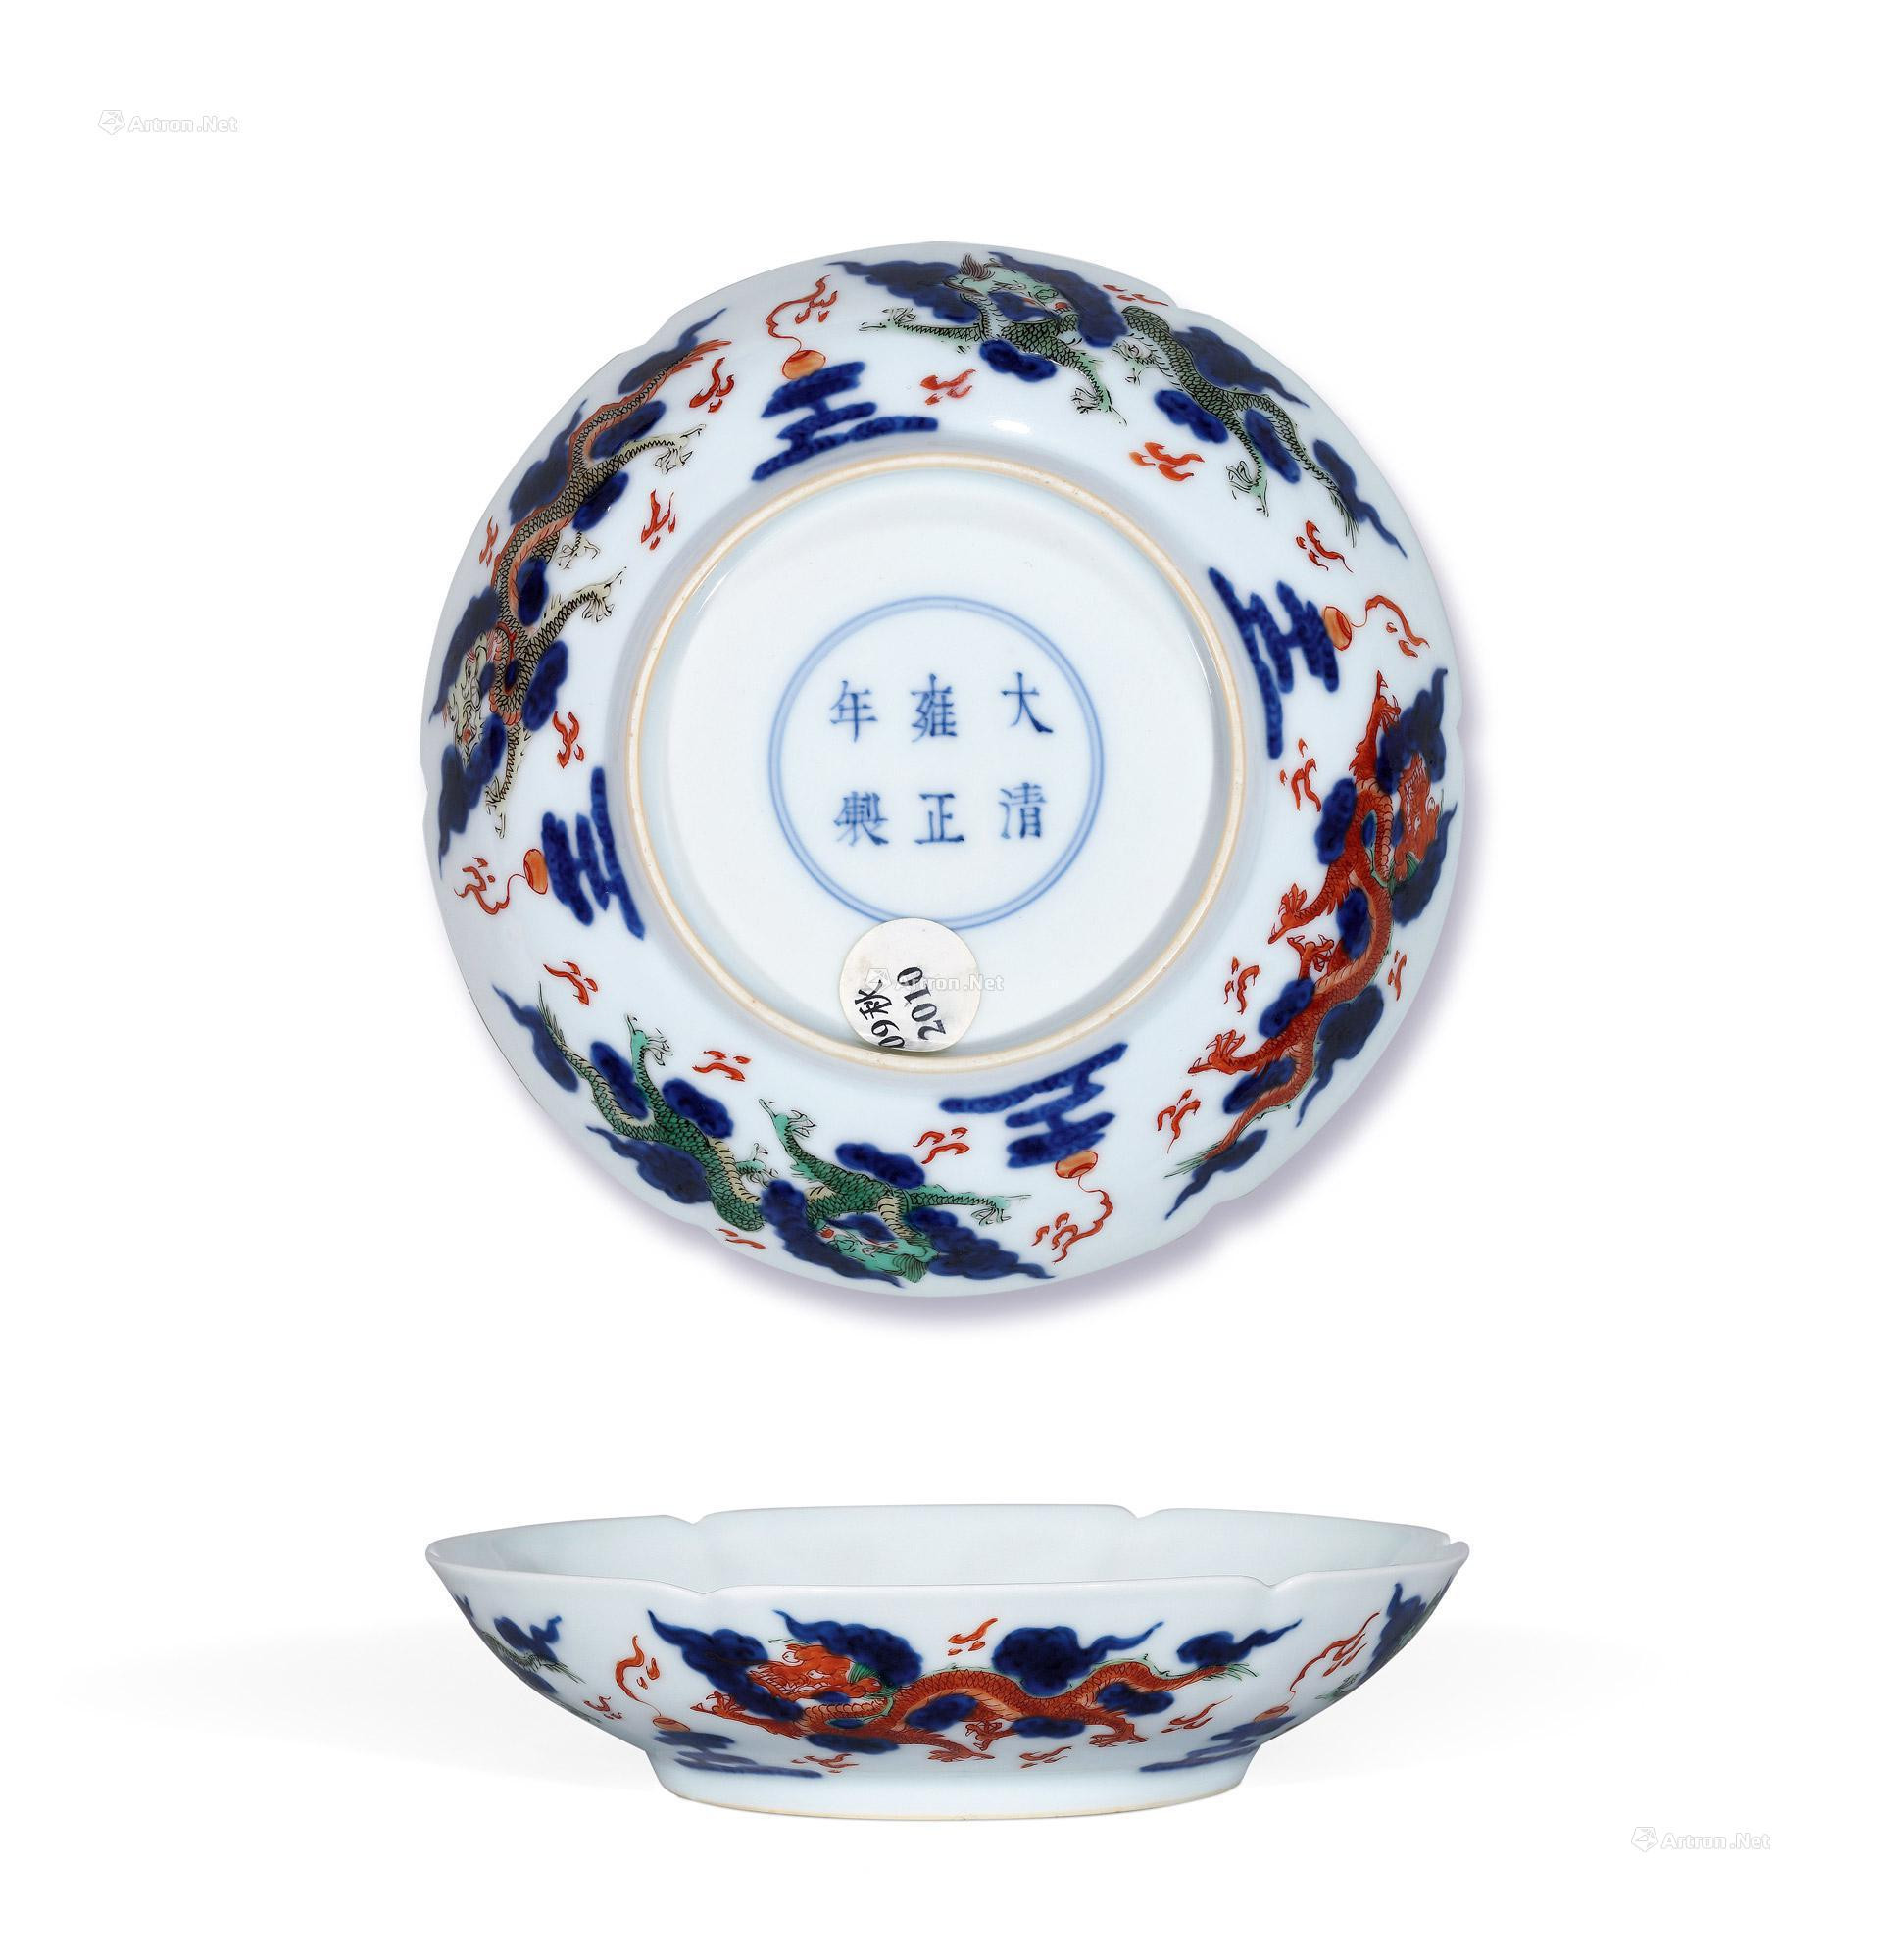 A FAMILLE-VERTE AND UNDERGLAZE BLUE AND WHITE BARBED-RIMMED ‘DRAGON’ DISH